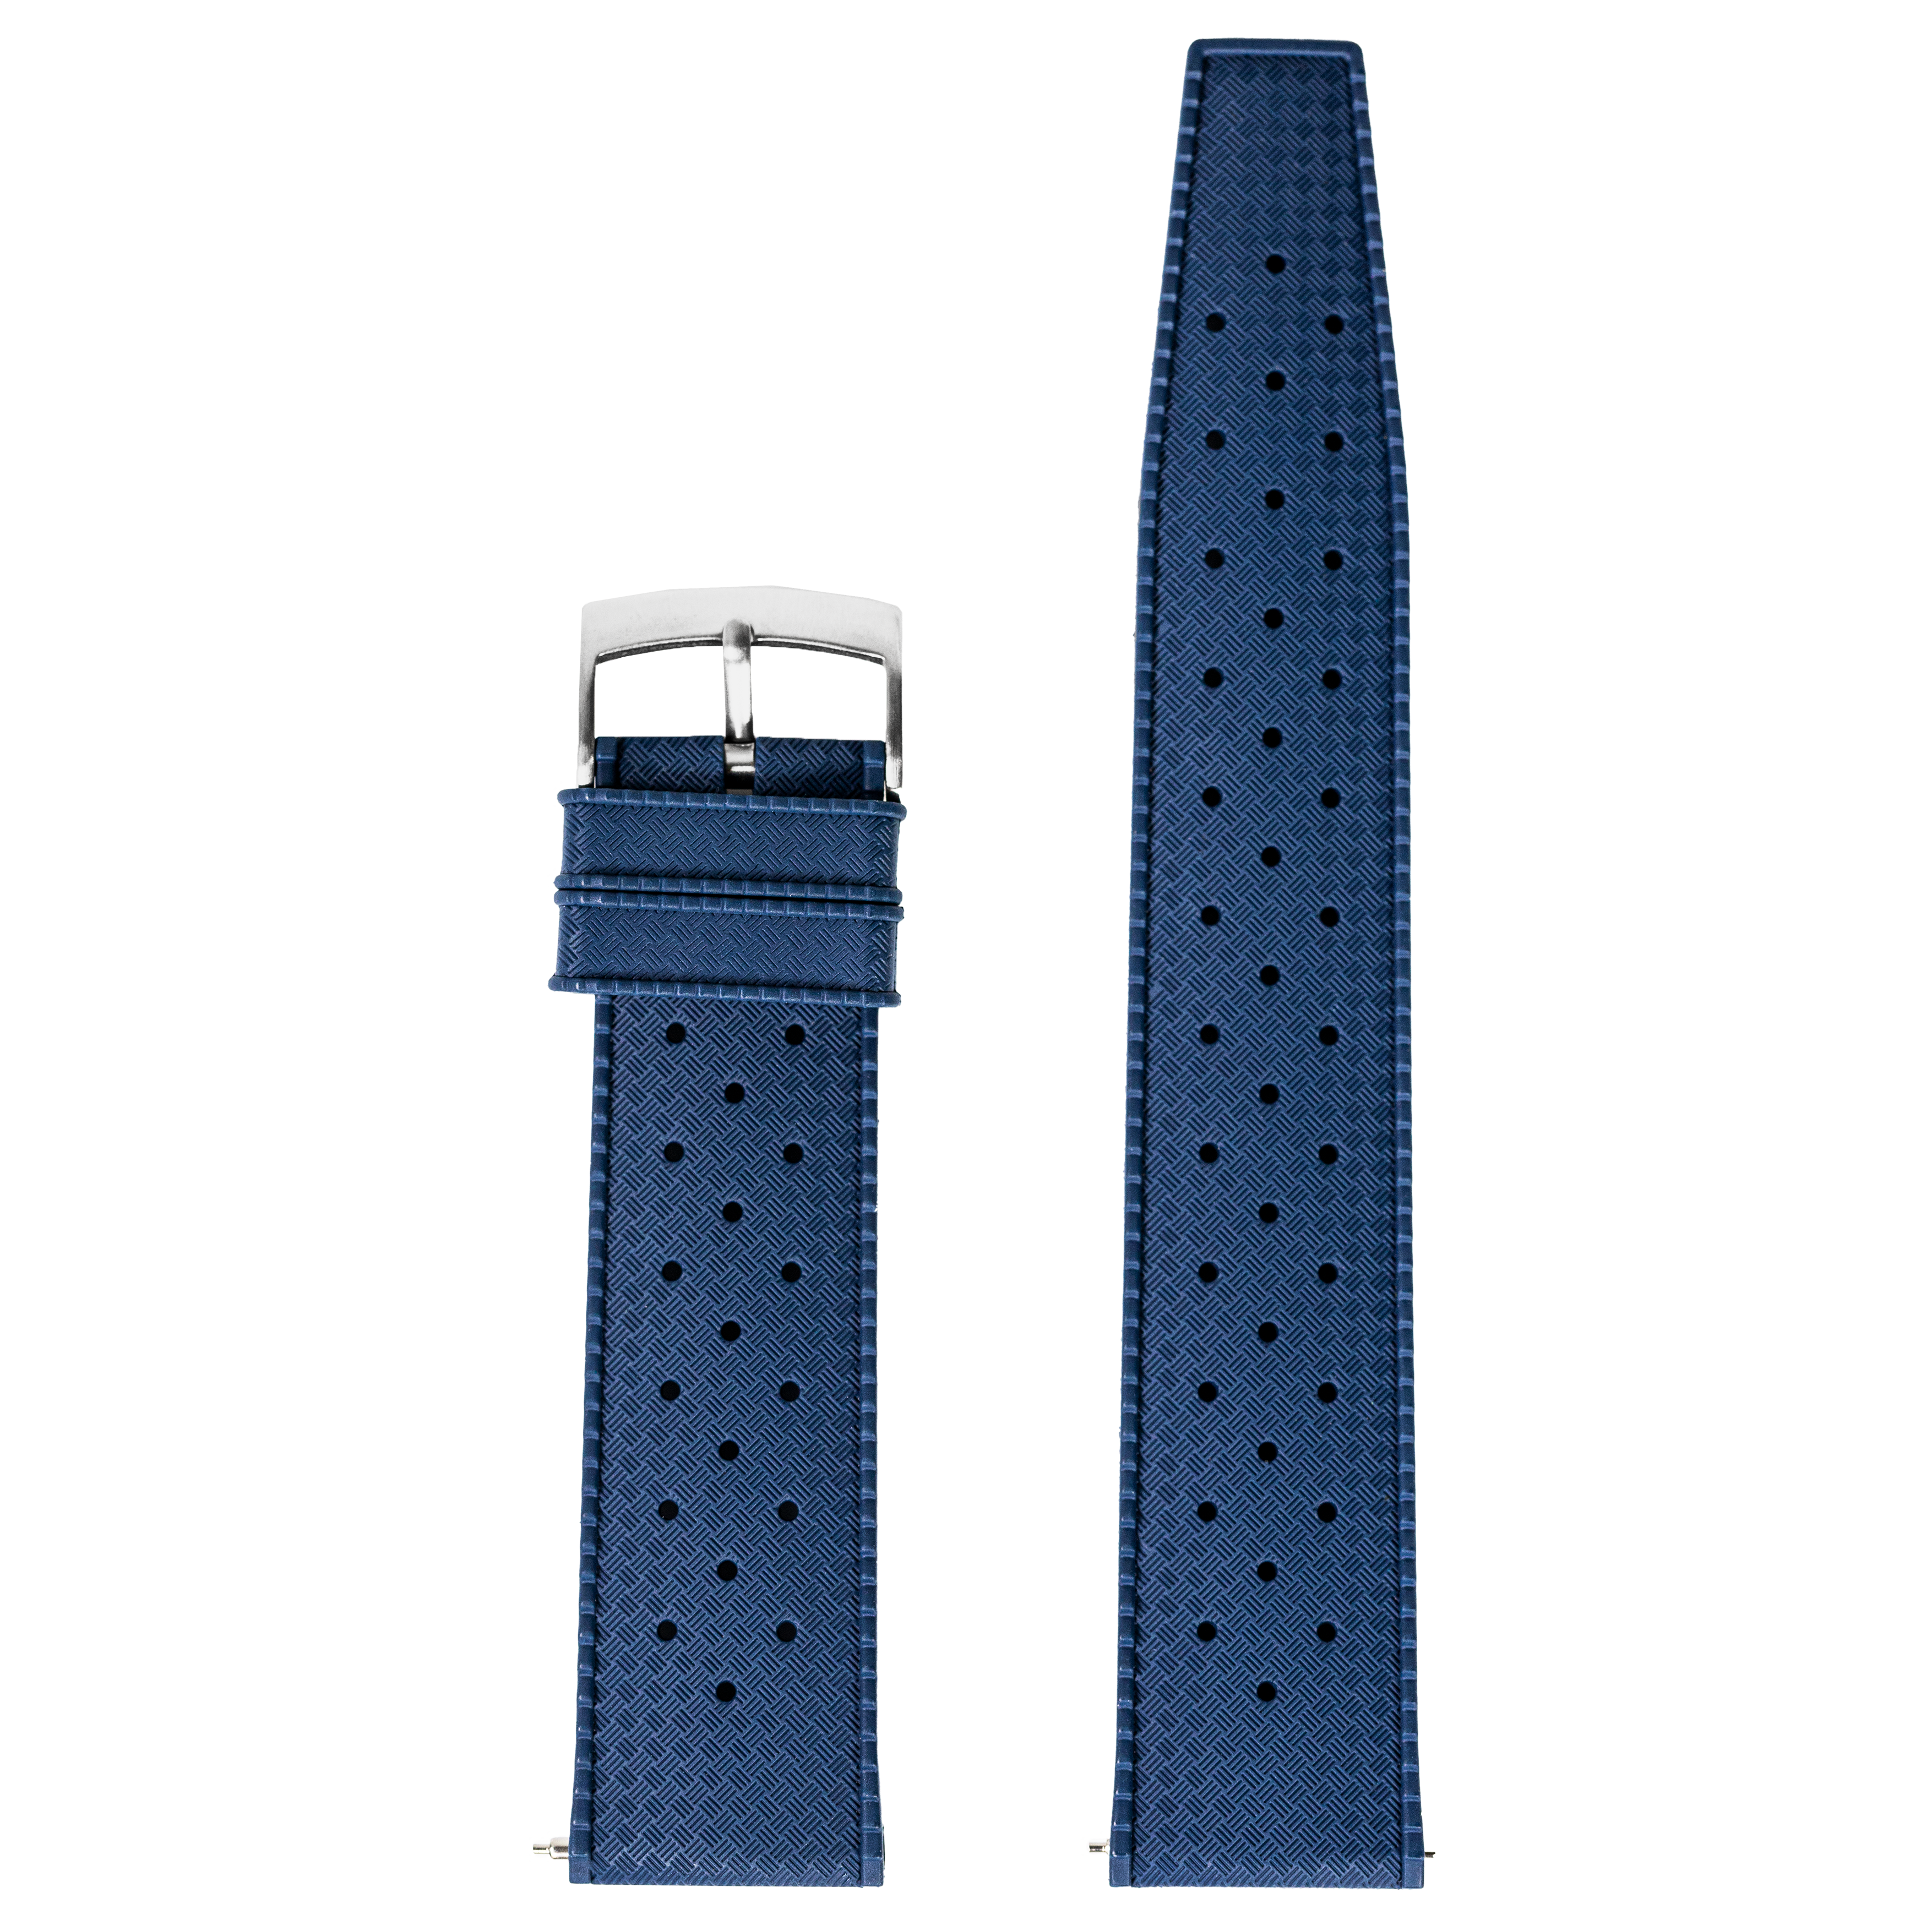 [QuickFit] King Tropic FKM Rubber - Navy Blue 22mm